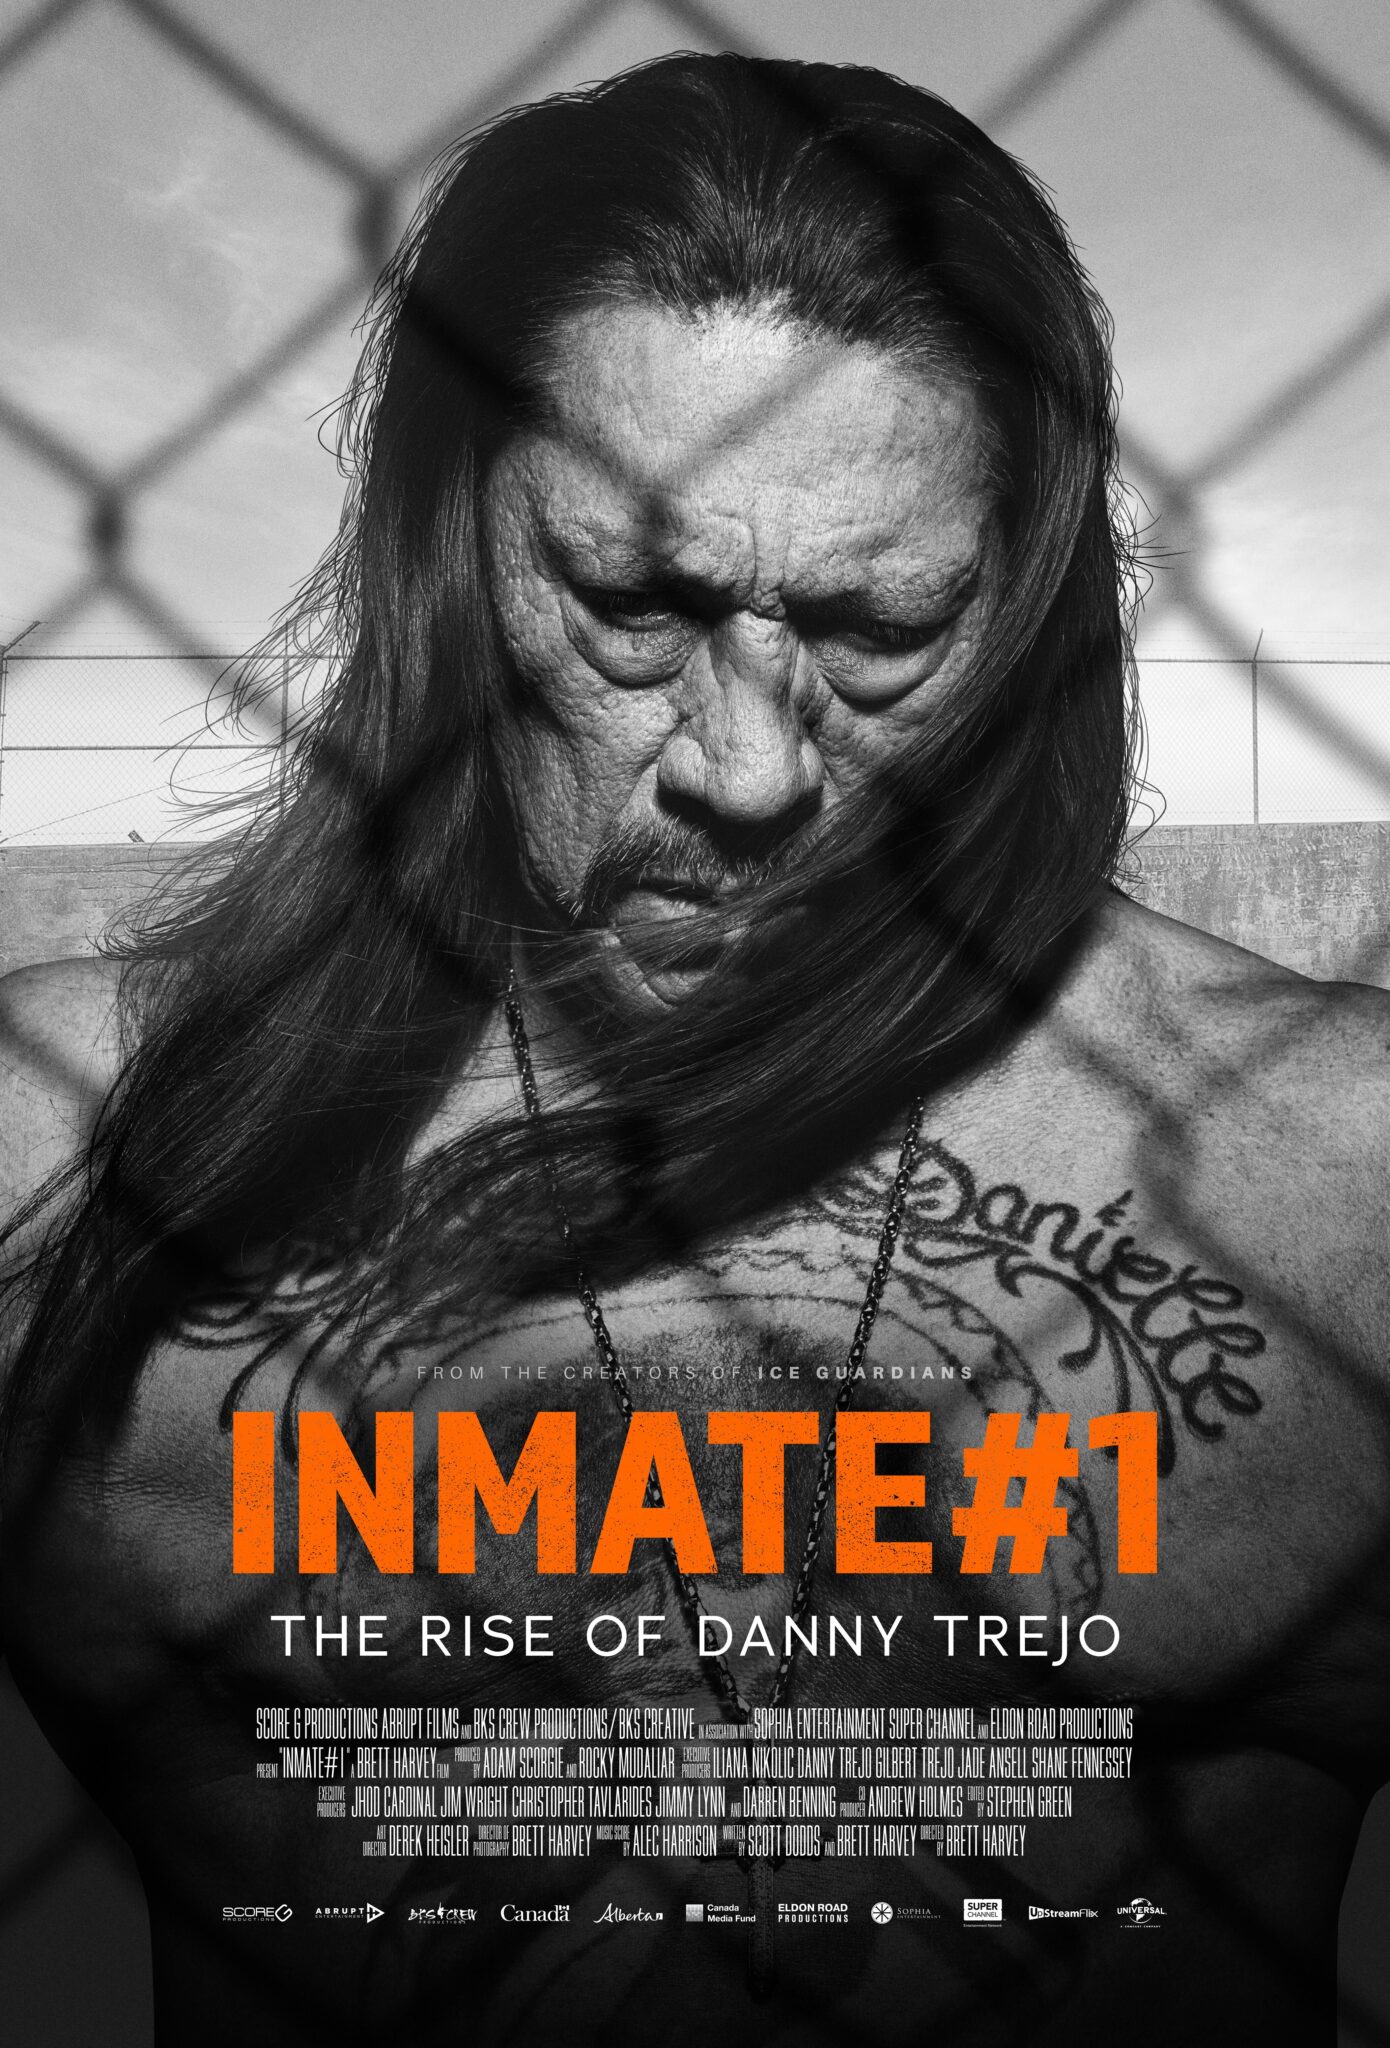 New International Trailer Released For Inmate 1 The Rise Of Danny Trejo 